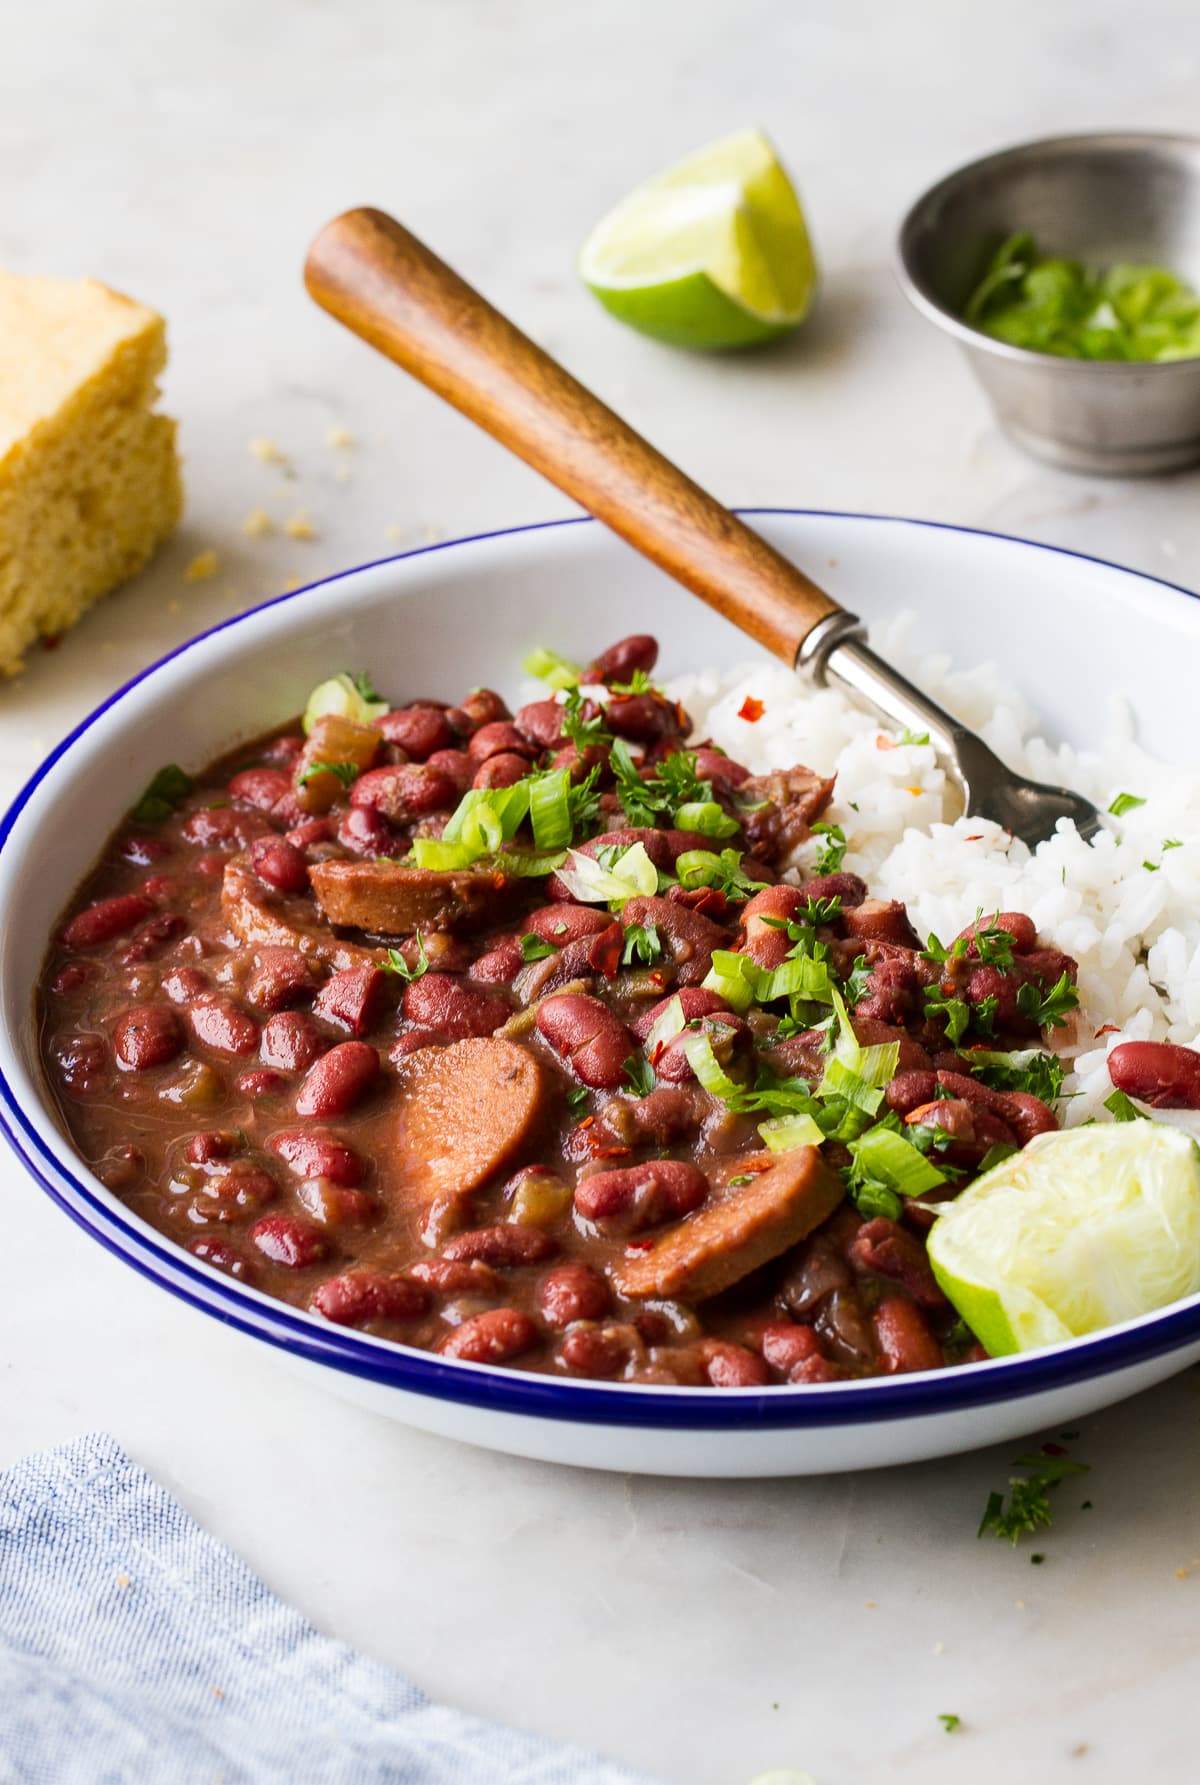 side angle view of a white bowl with blue rim filled with a serving of vegan red beans and rice.